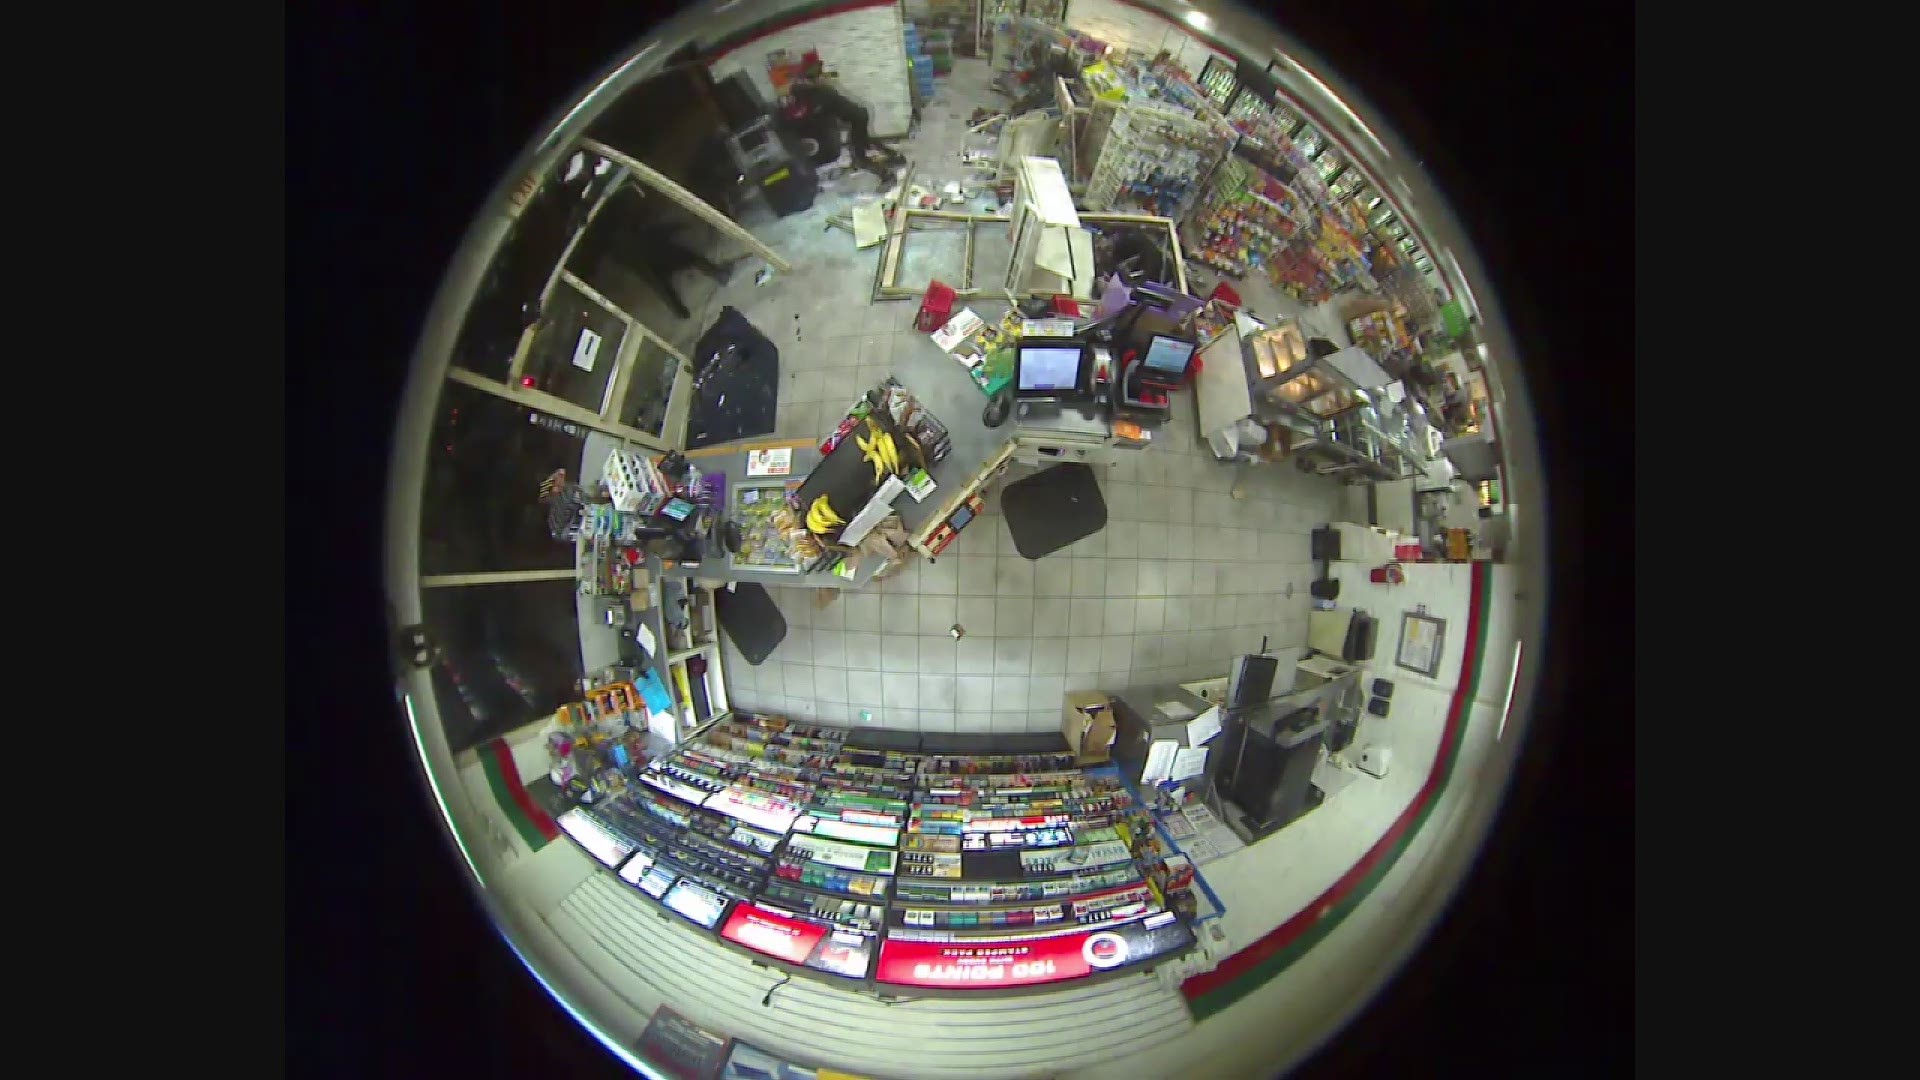 The smash and grab happened at a 7-Eleven.